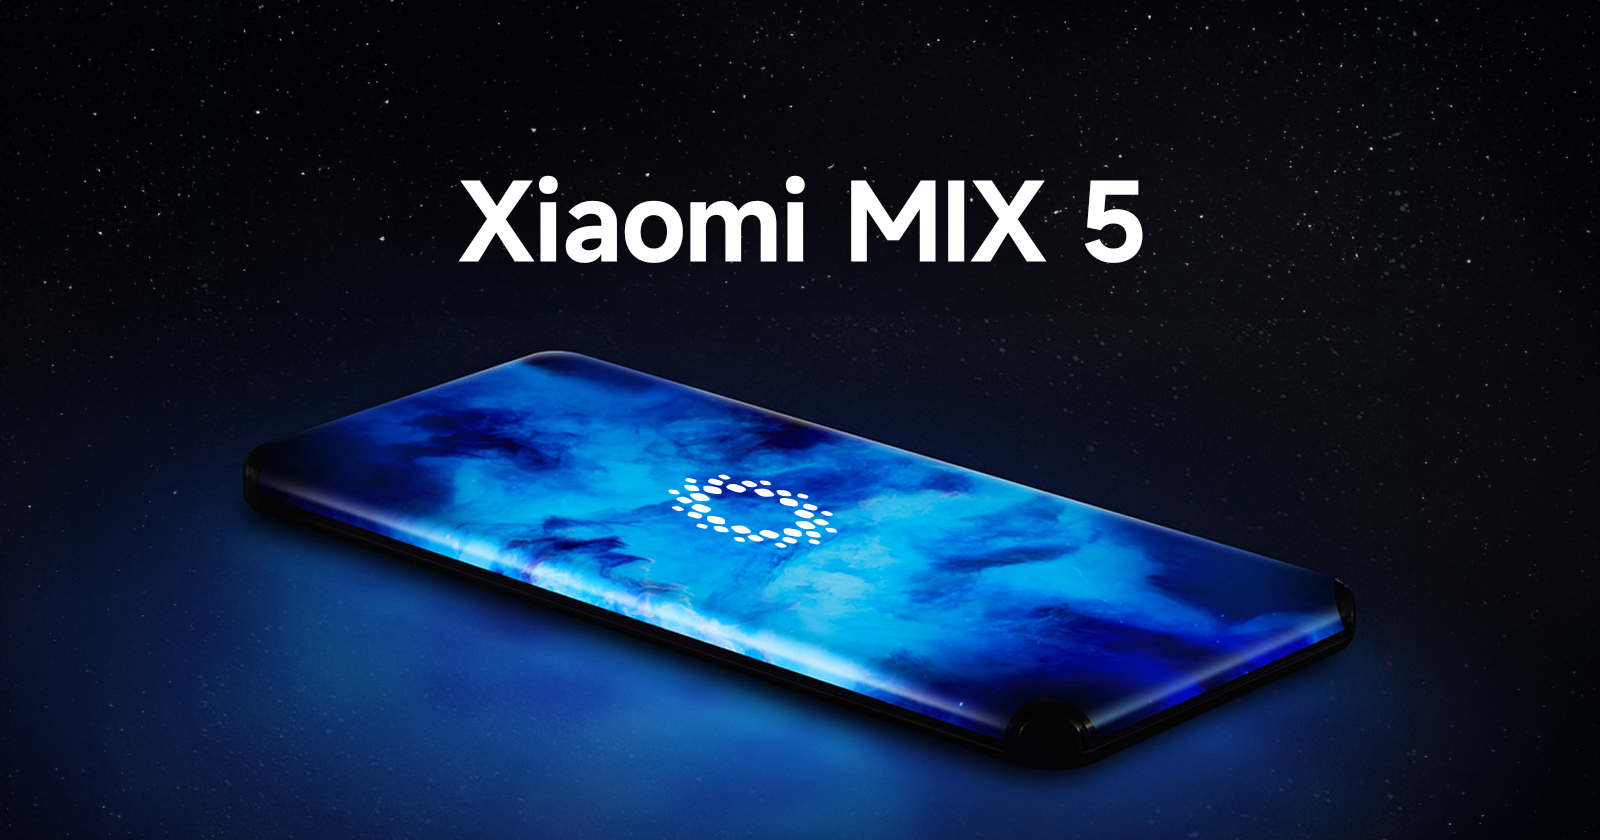 Xiaomi MIX 5 is coming, but in 2025